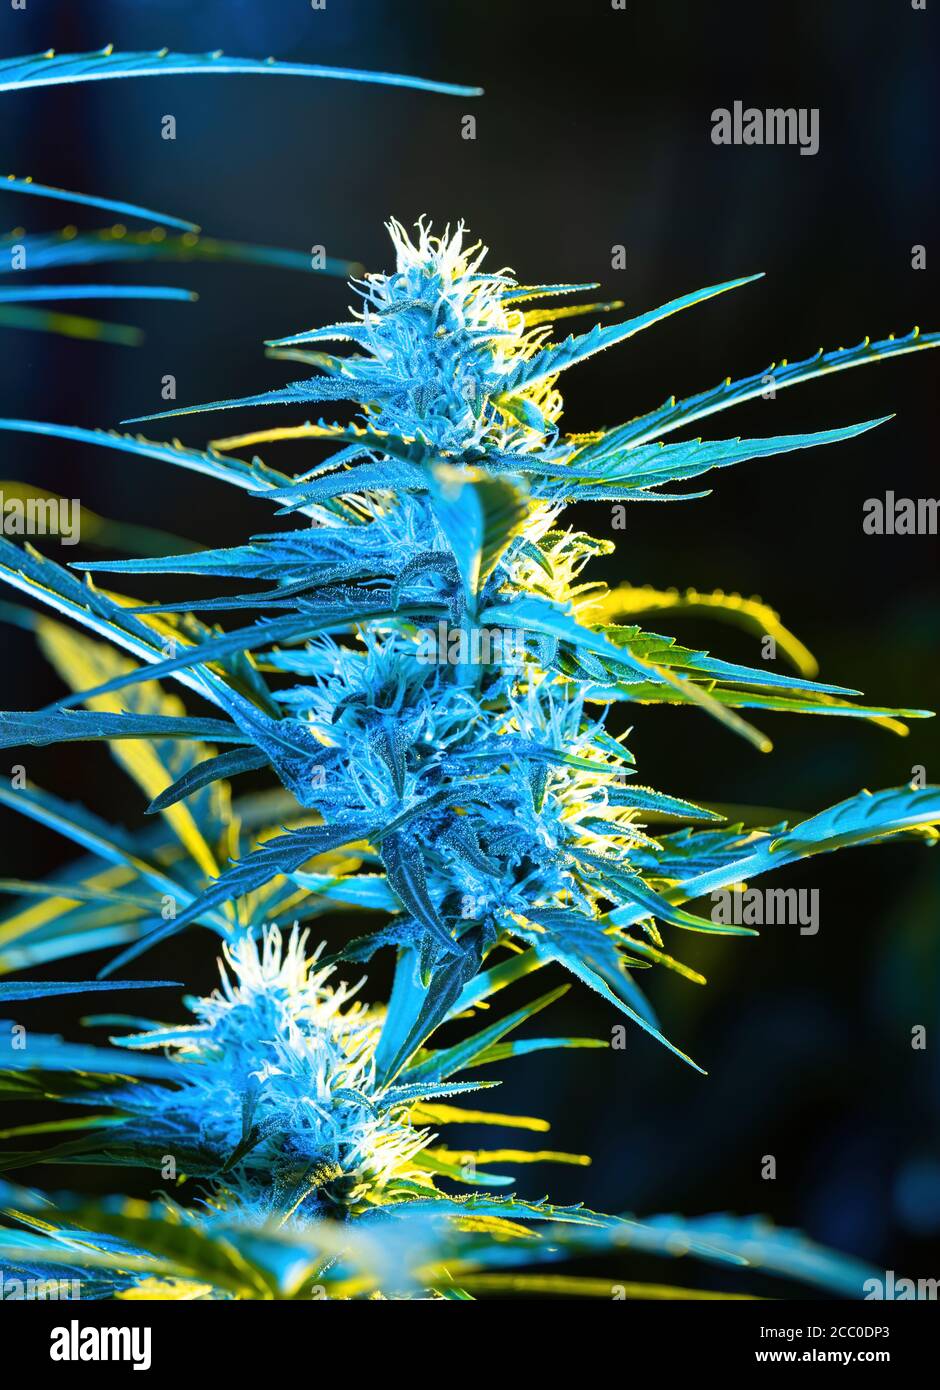 Ripe cannabis plant - Northern Light. Hemp illuminated by psychedelic color light for hallucination effect. Blooming female marijuana bud colas flower Stock Photo